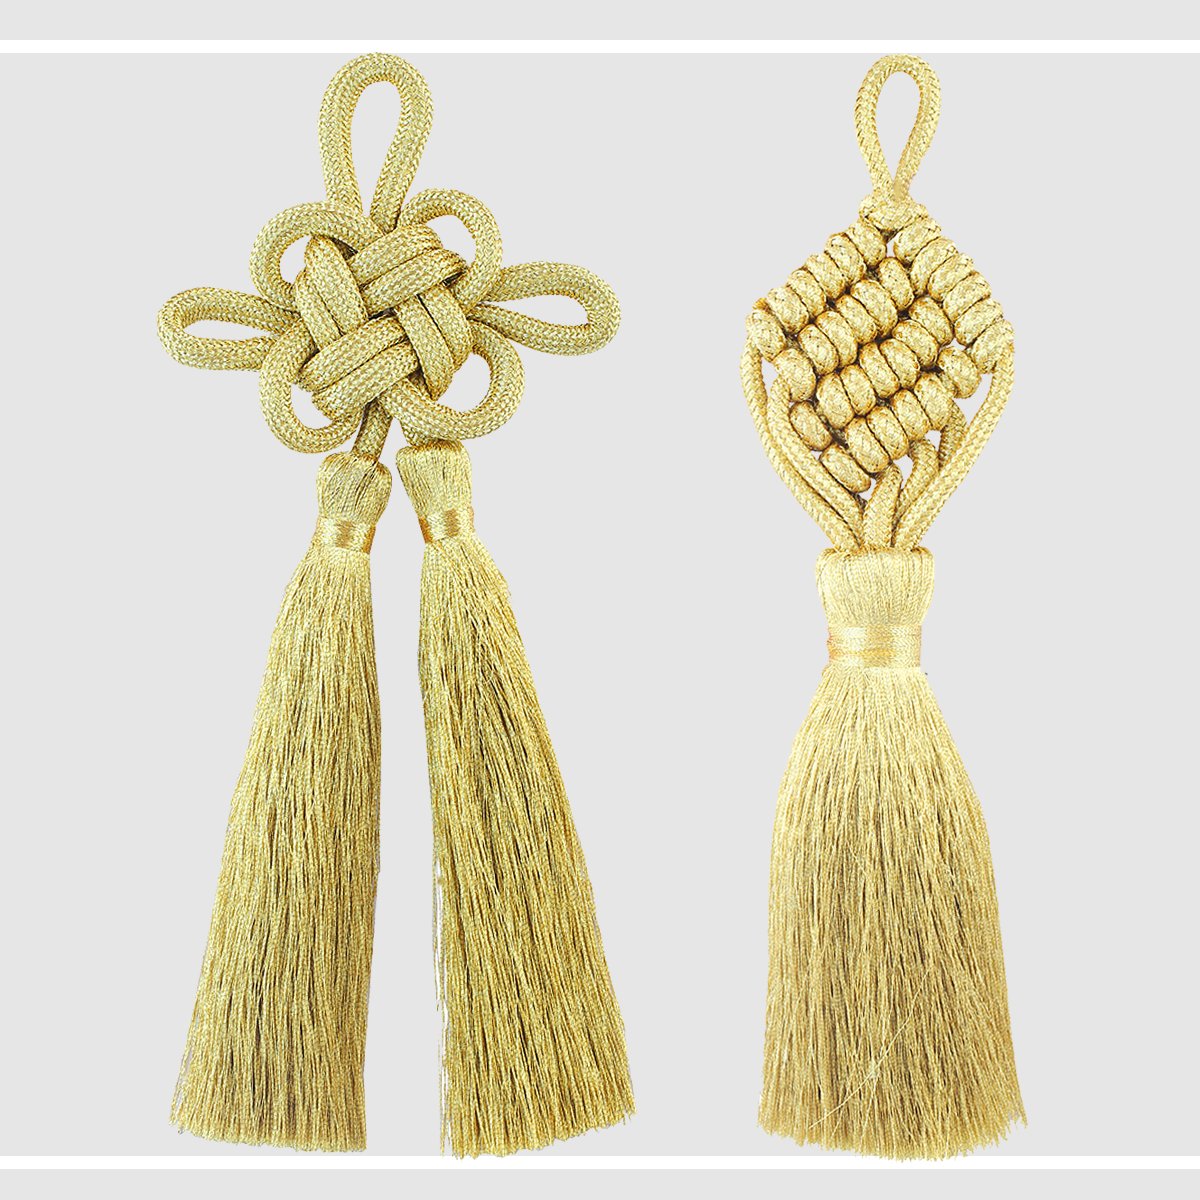 TASSELS (Inactive Temporarily)